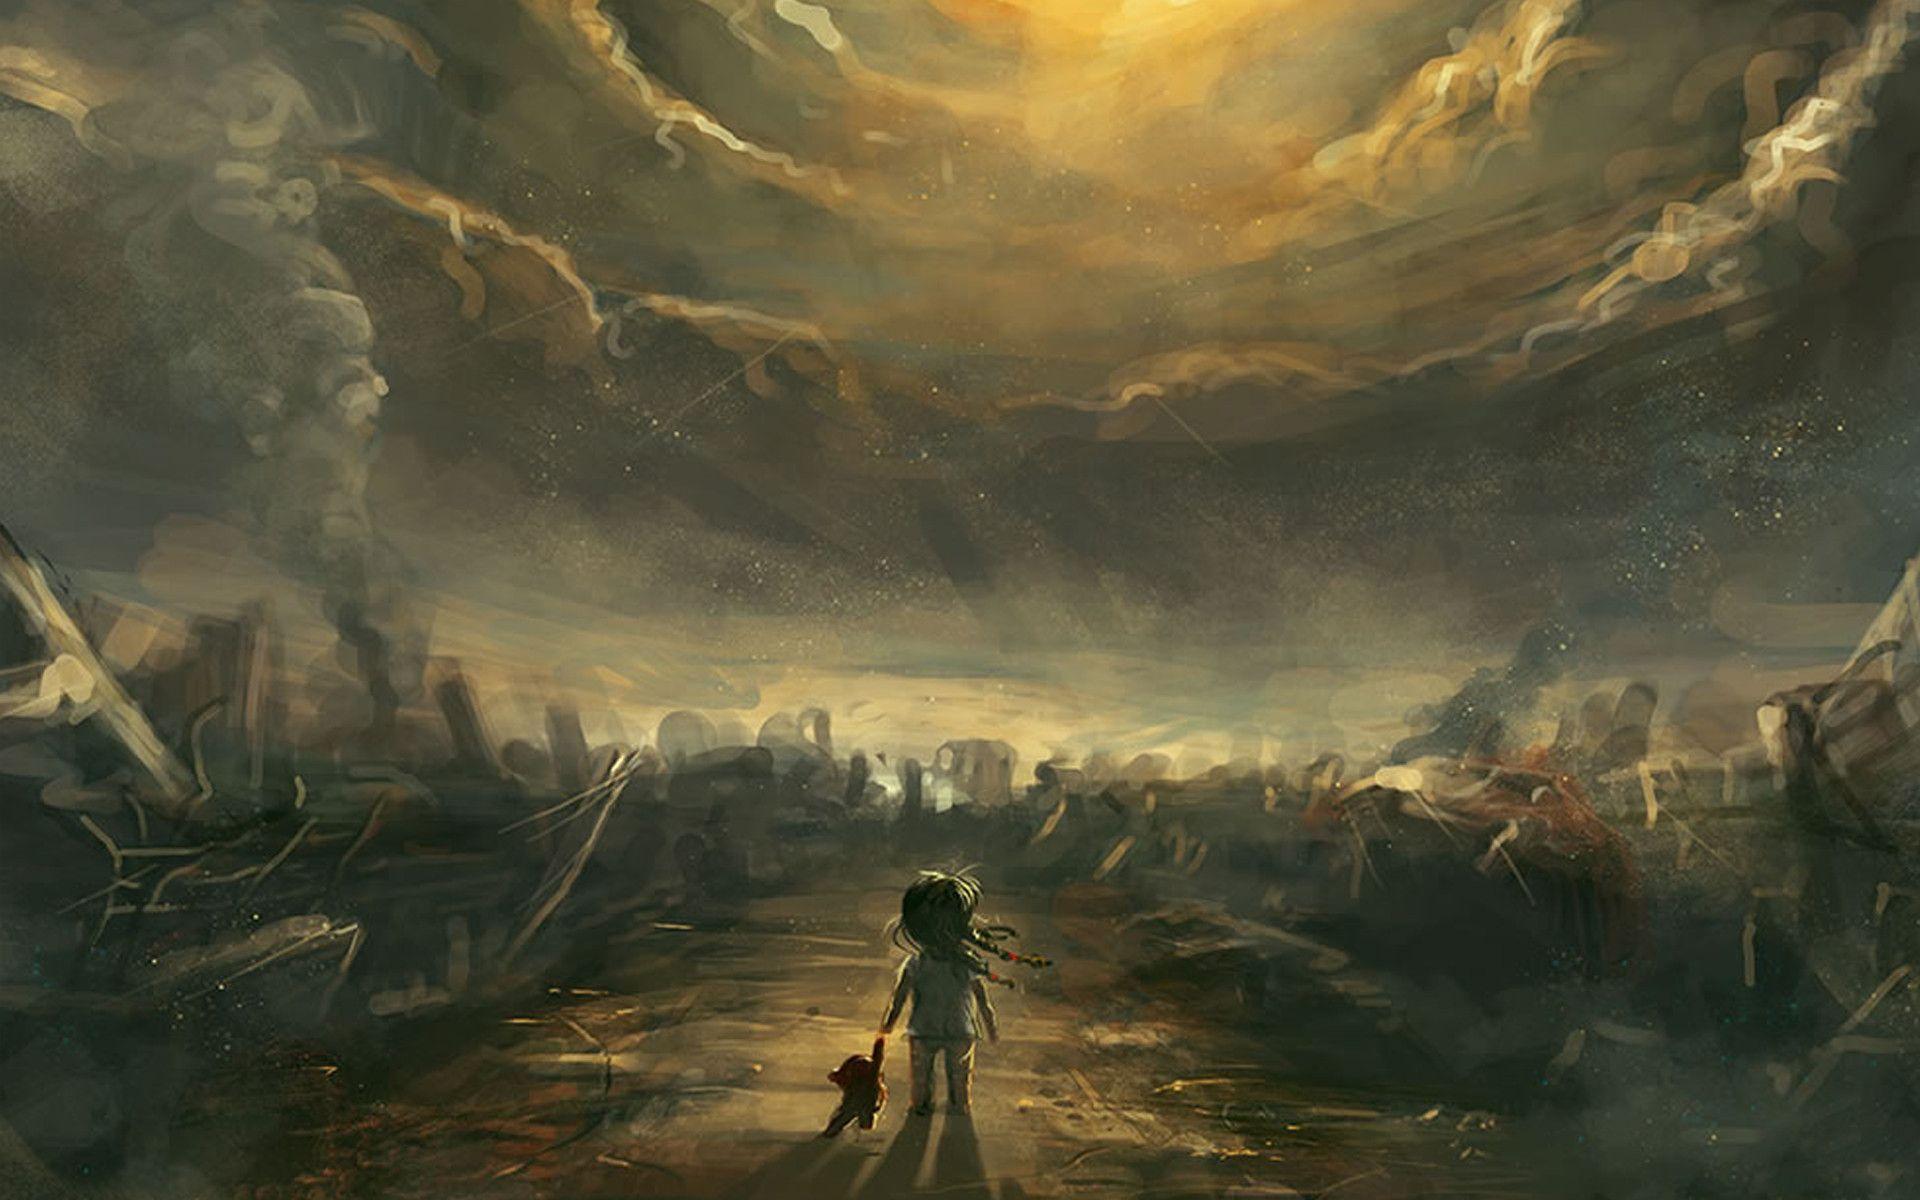 anime head drawing apocalyptic landscape